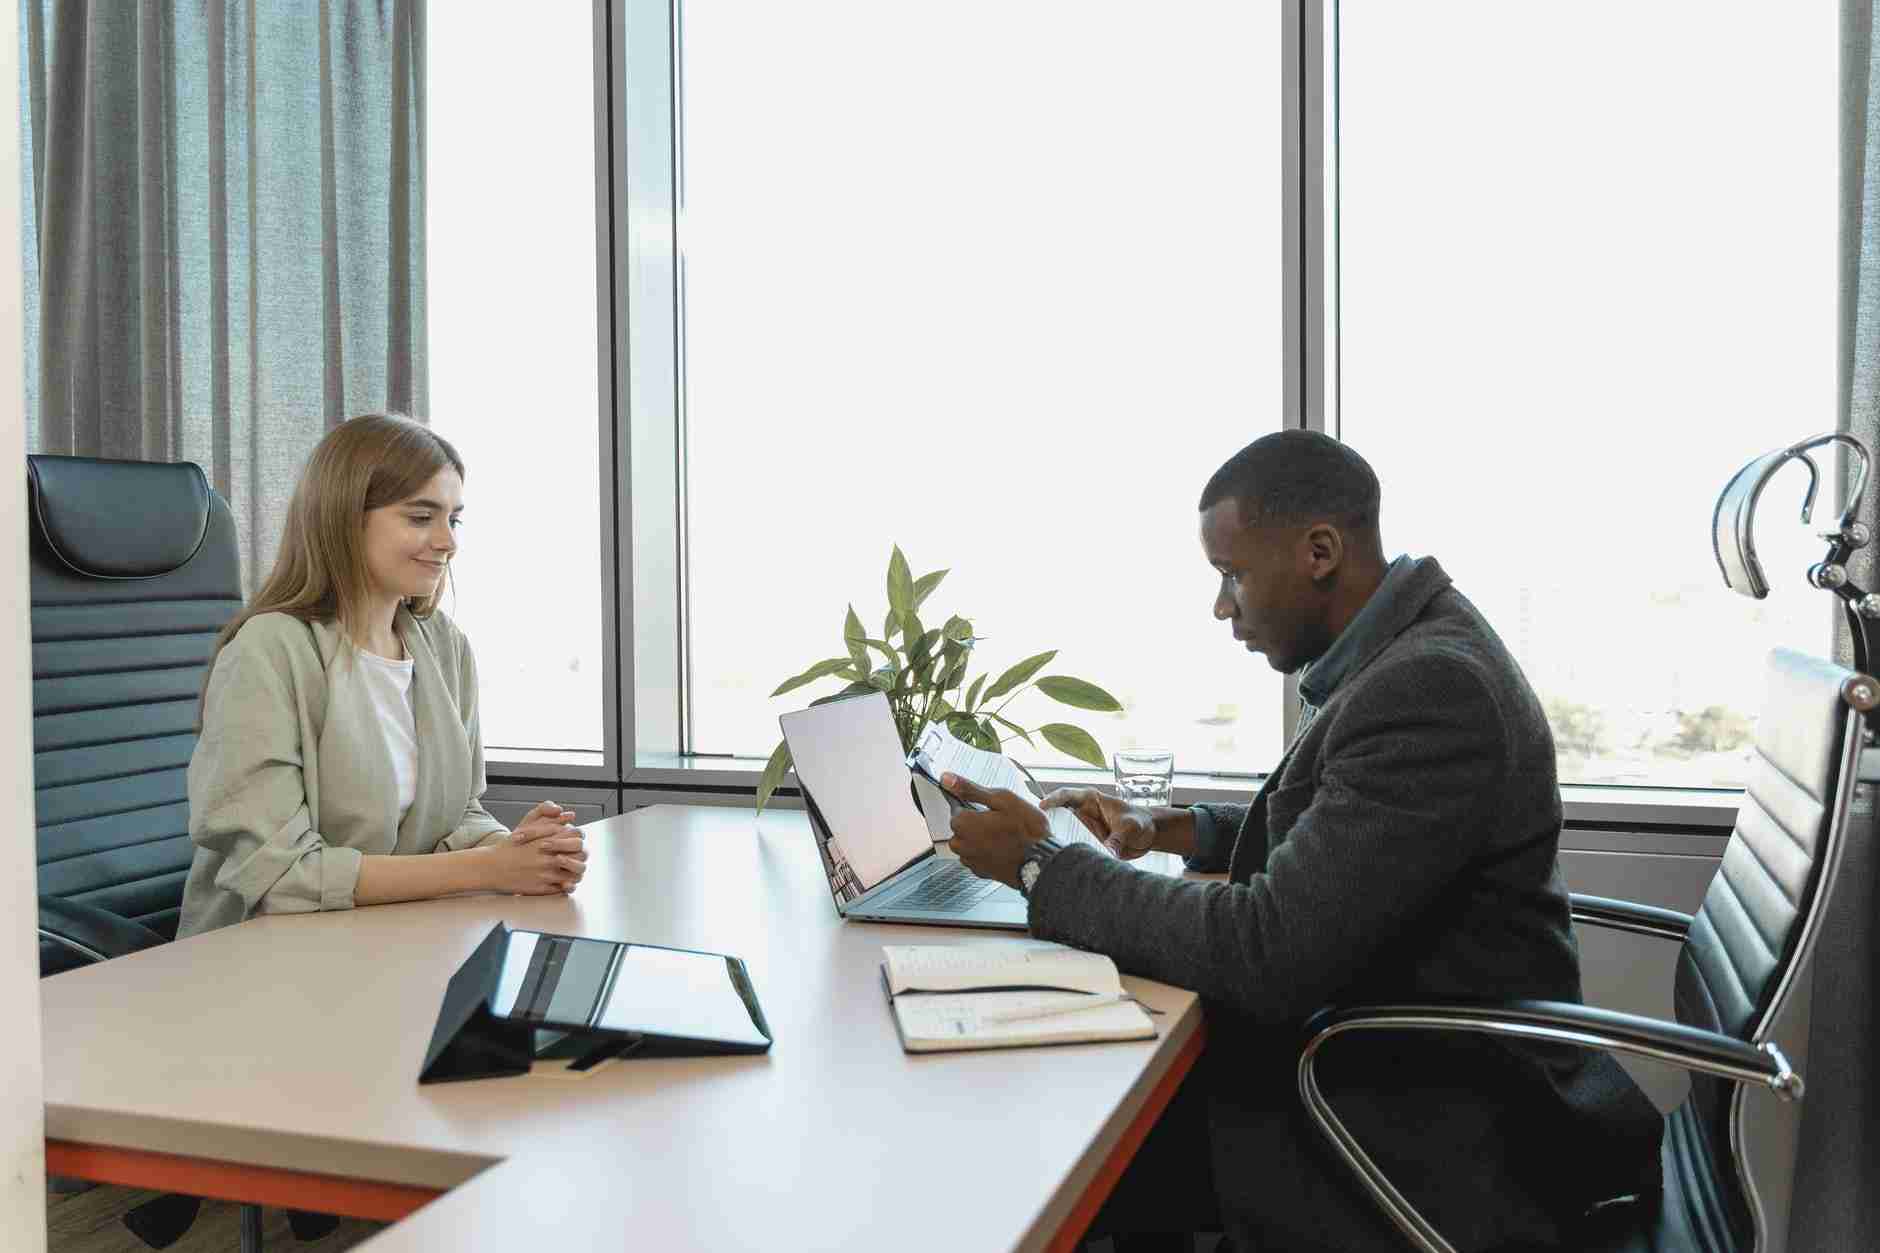 How To Prepare for Interviews - Best Interview Preparations